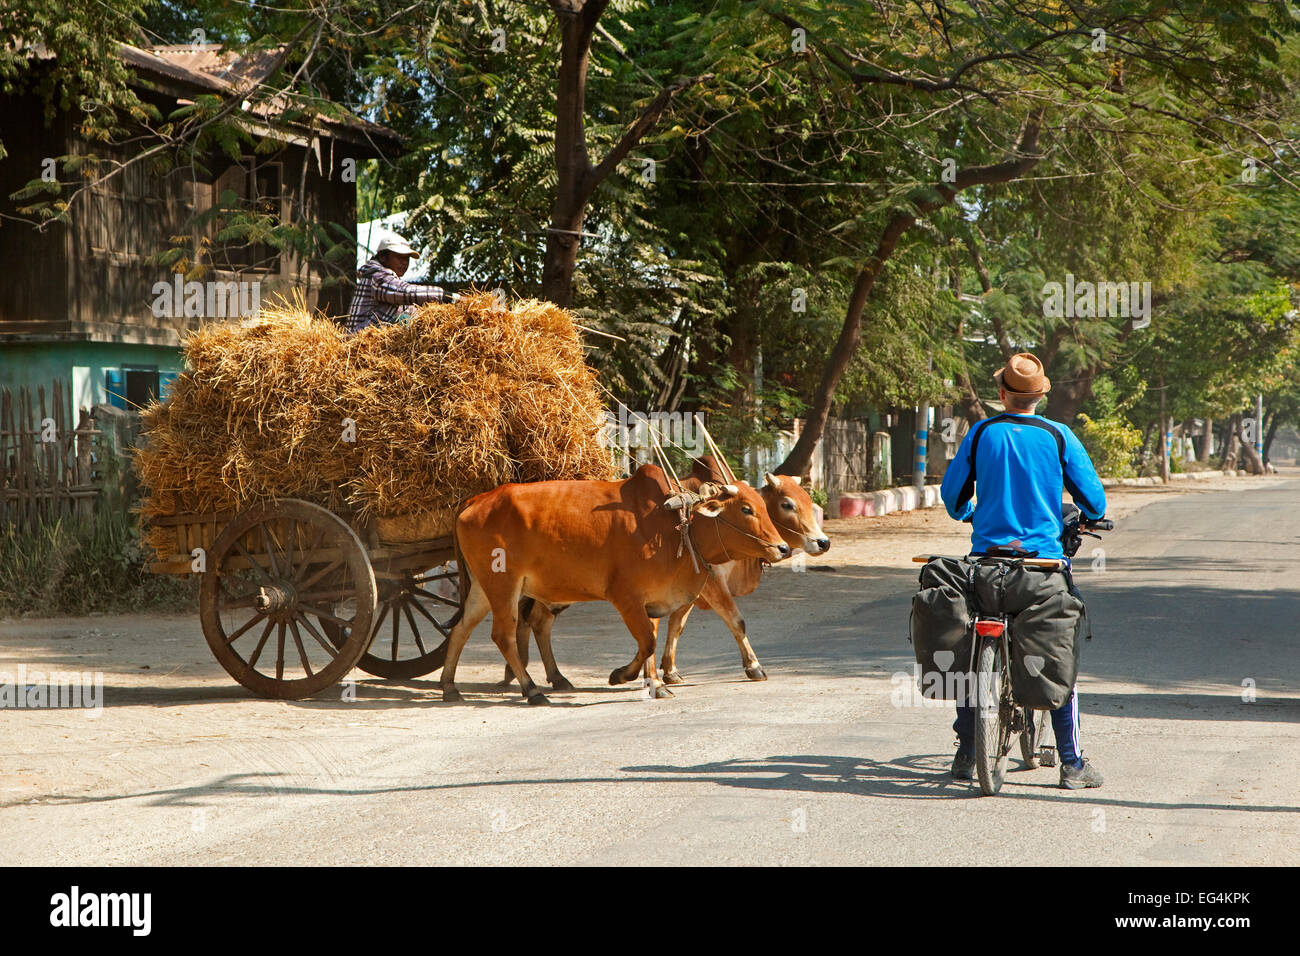 Western tourist waiting for cart loaded with hay pulled by two zebus / Brahman oxen to cross the road in Myanmar / Burma Stock Photo